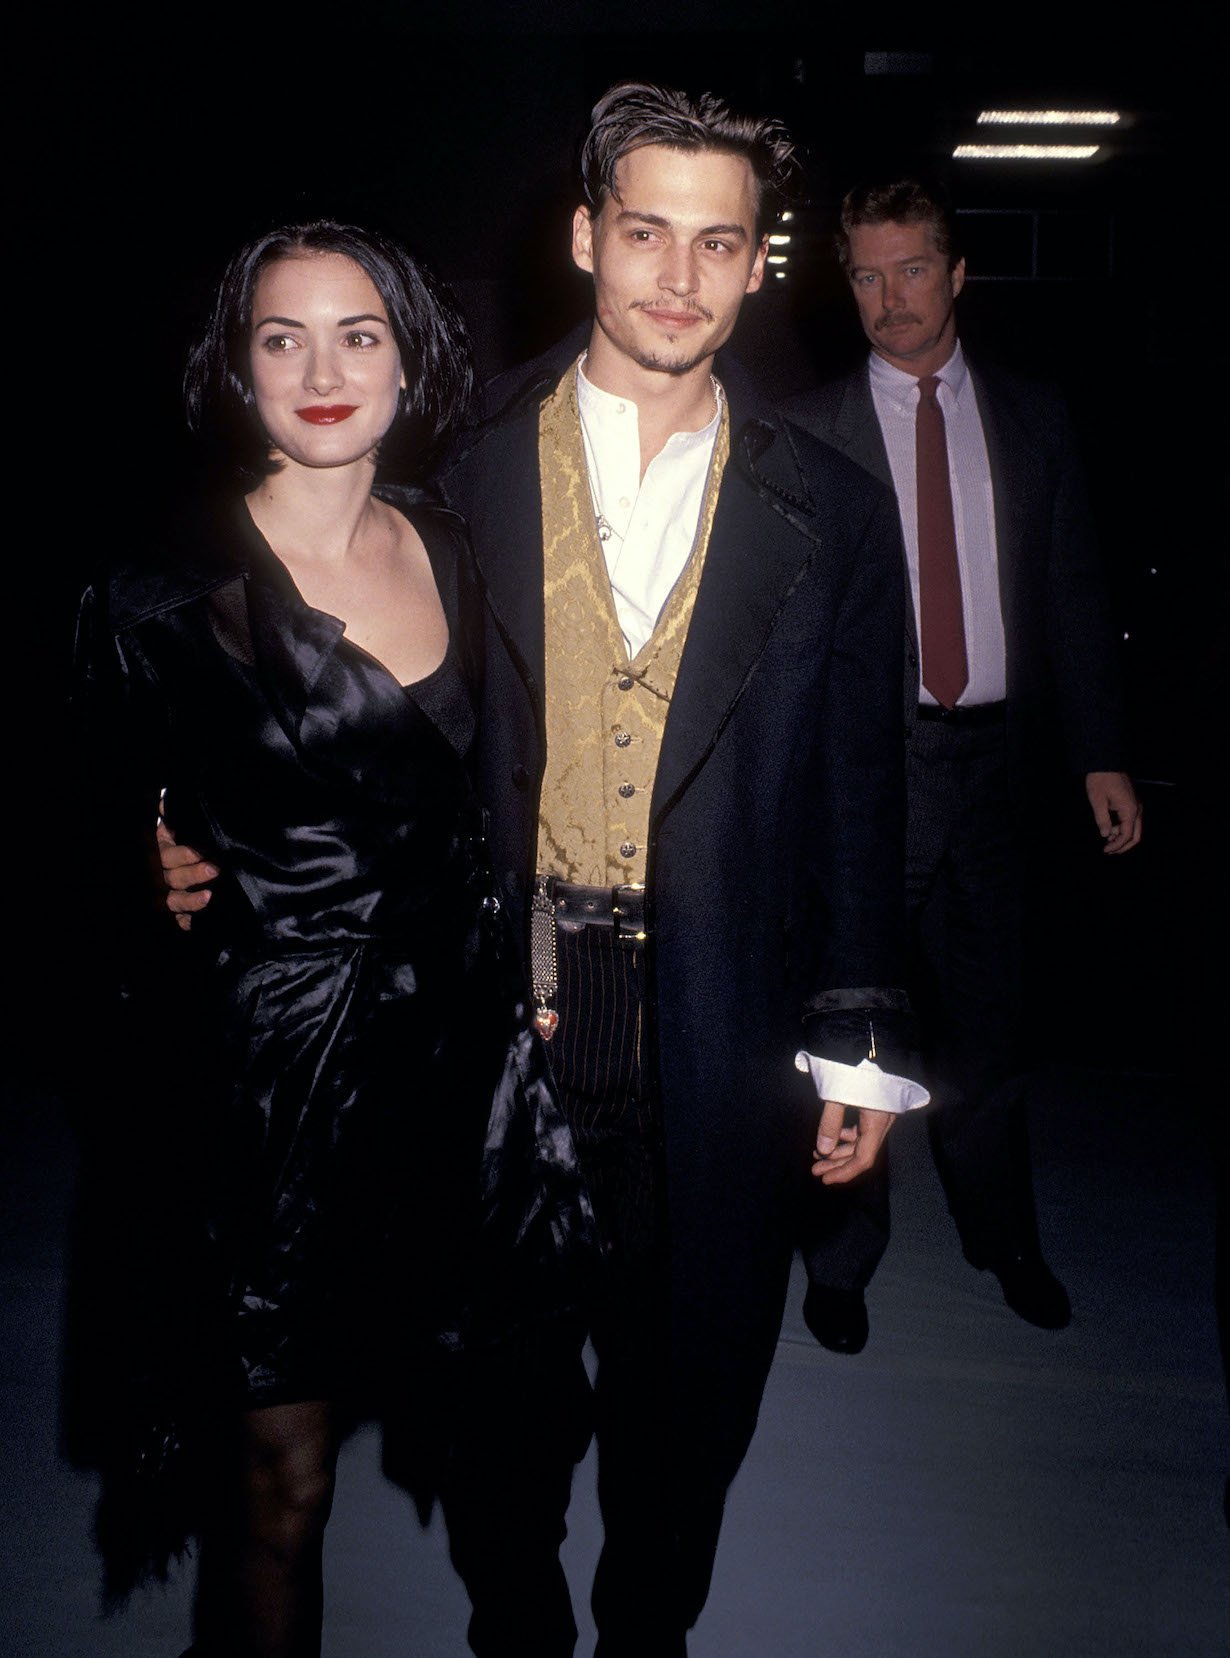 Winona Ryder and Johnny Depp attend the 'Edward Scissorhands' Westwood Premiere in 1990